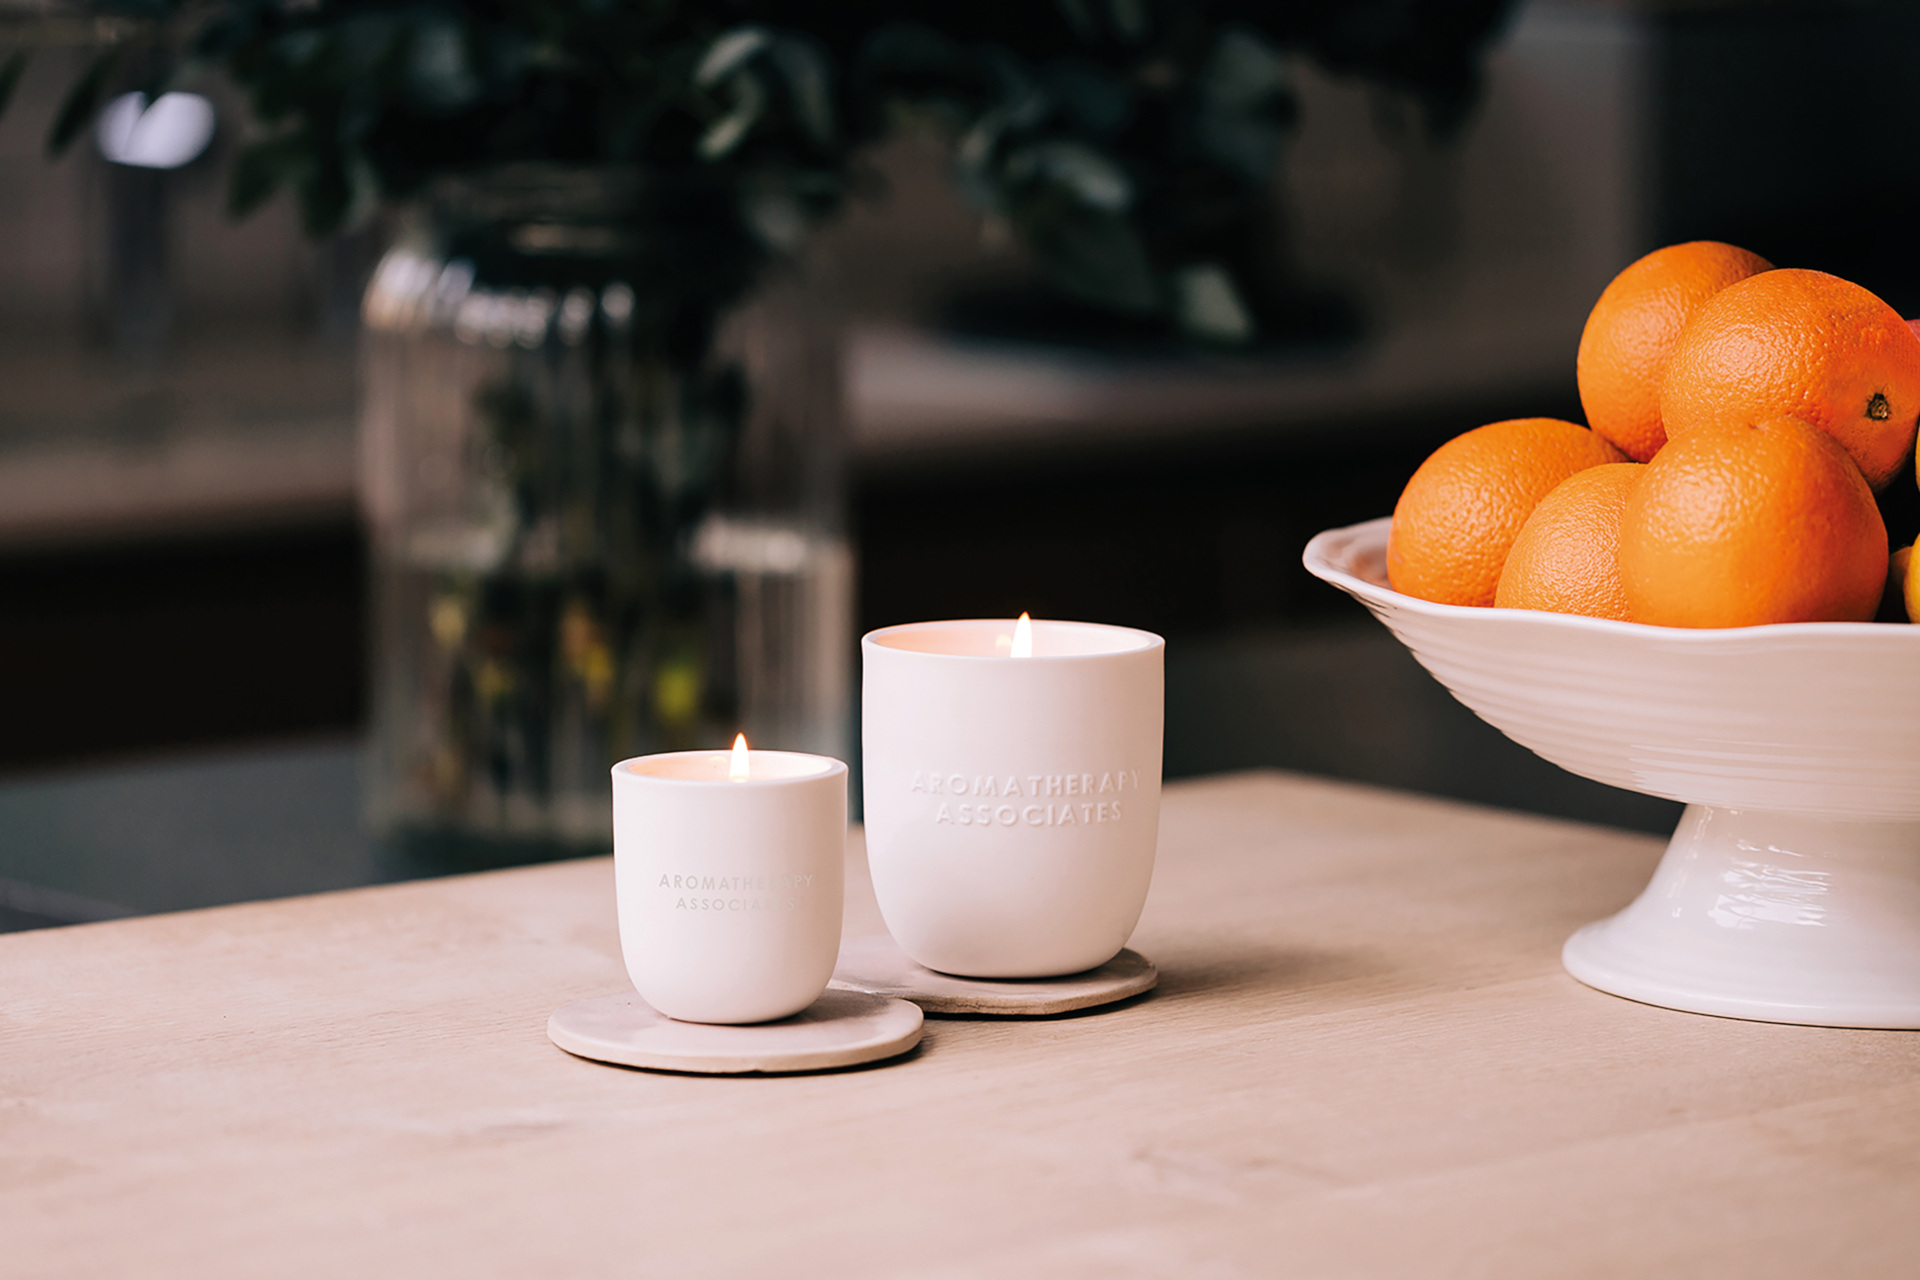 Candles on table with bowl of oranges